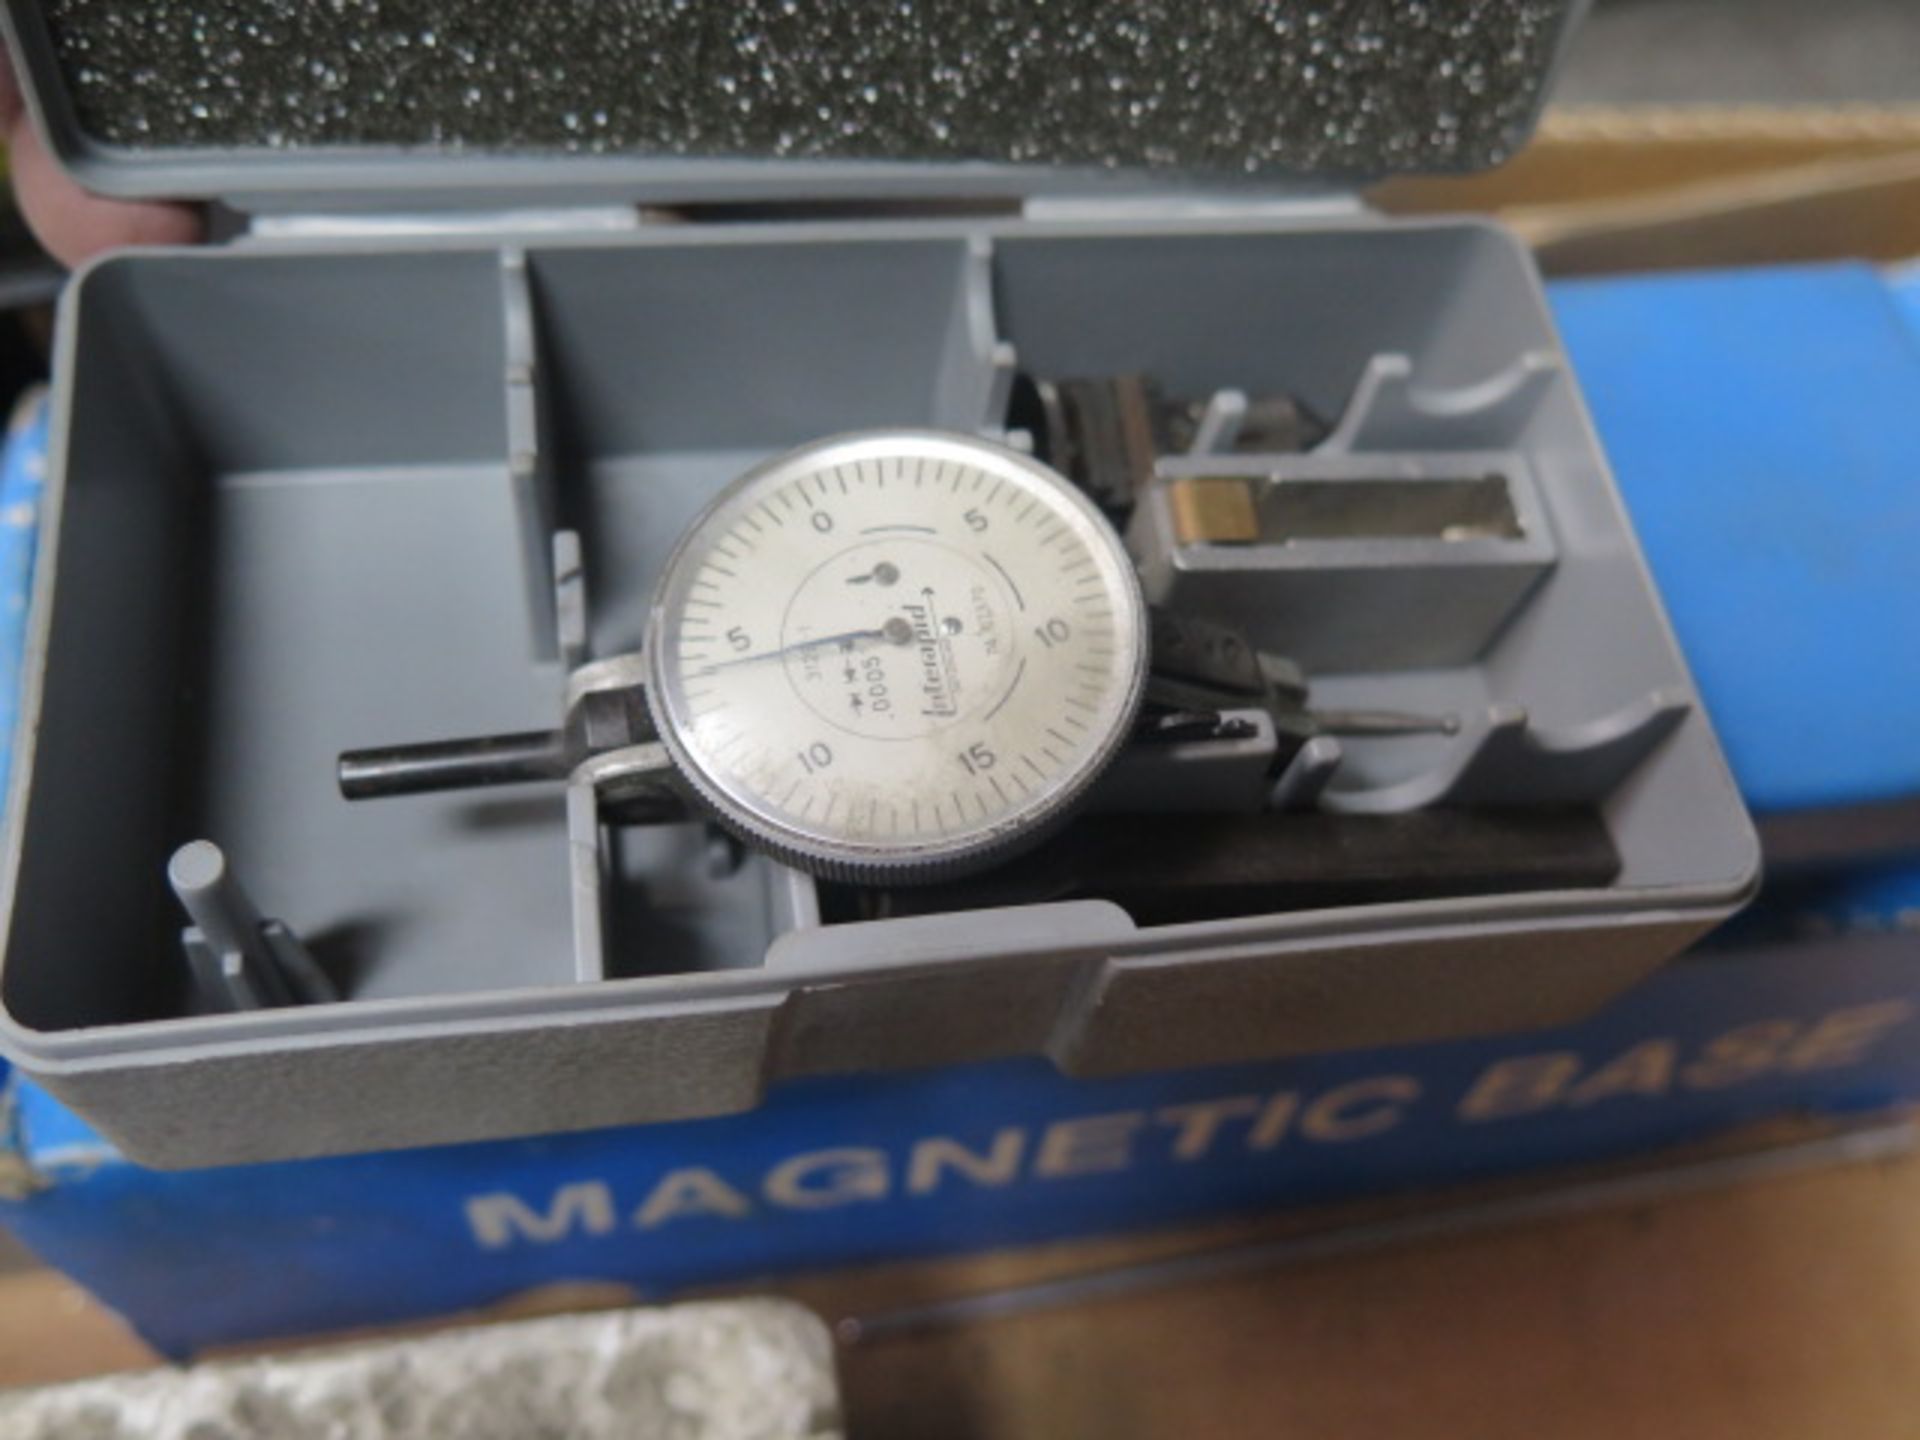 Fowler 12" Vernier Height Gage, Links Universal Indicator, Dial Test Indicators and Angle Blocks - Image 5 of 7